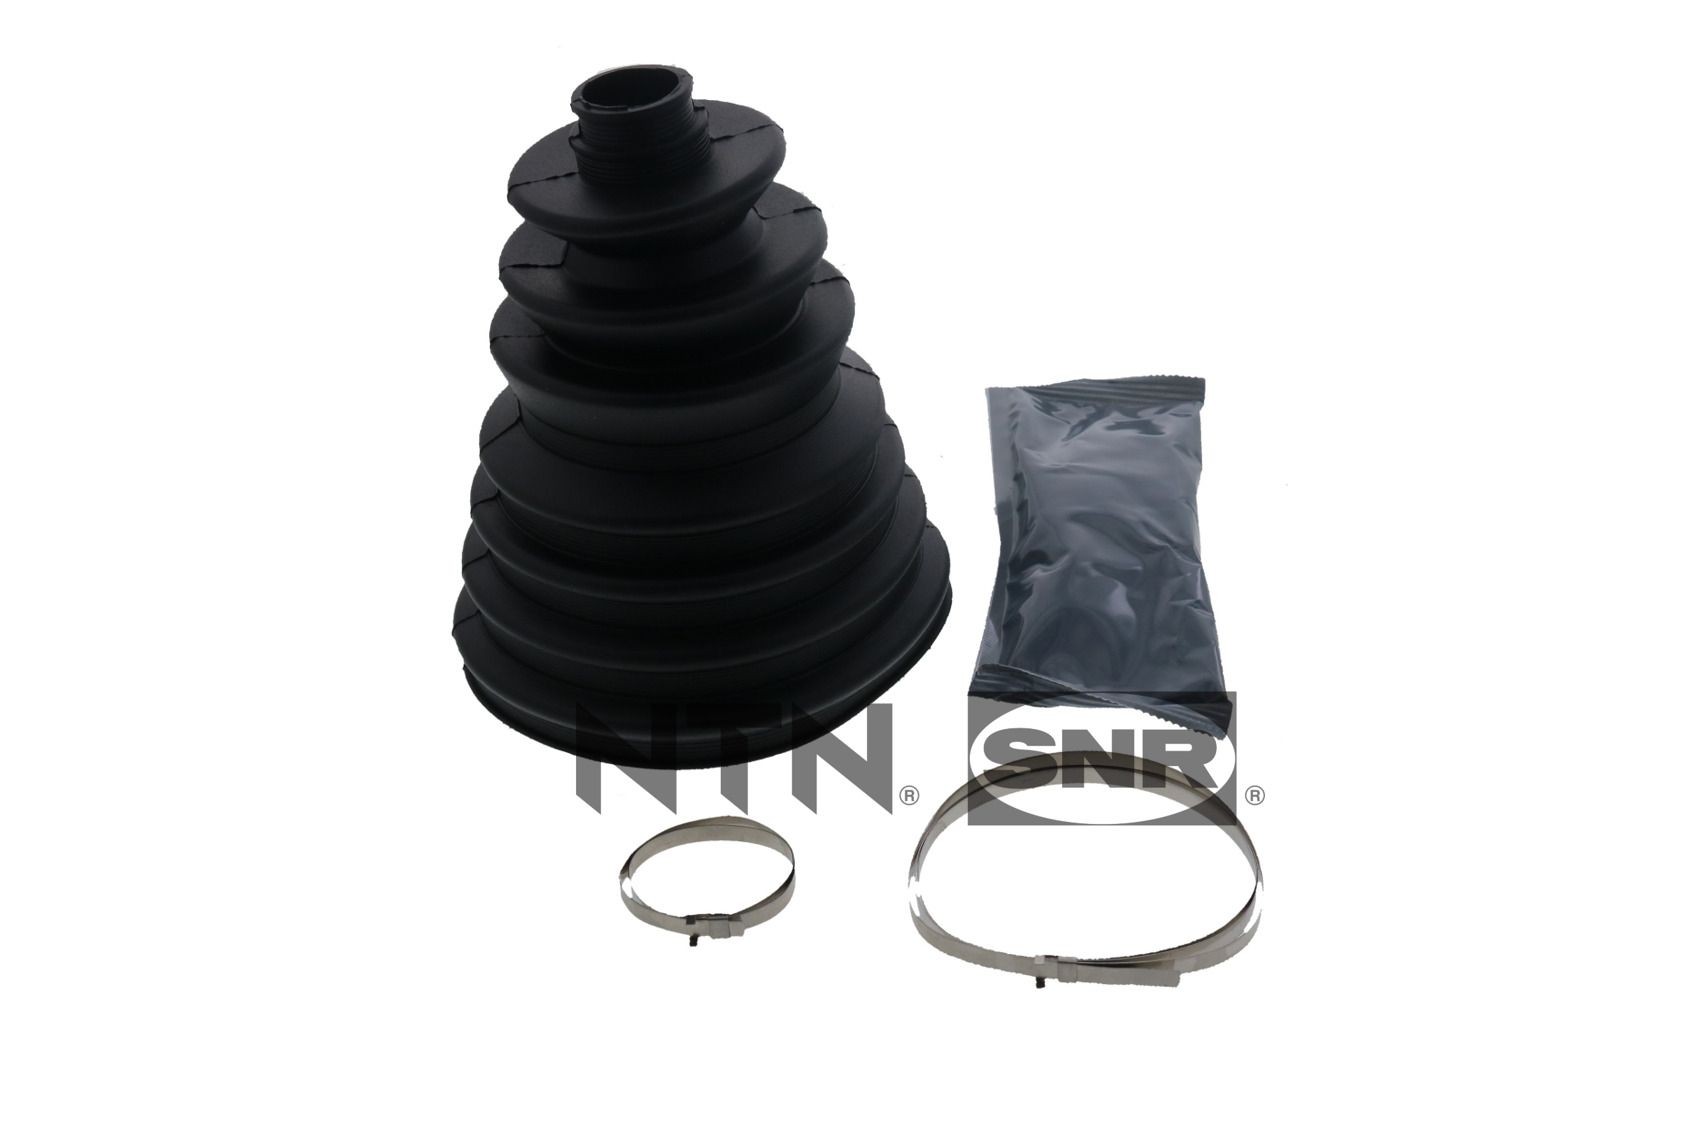 Renault GRAND SCÉNIC Drive shaft and cv joint parts - Bellow Set, drive shaft SNR OBK10.002